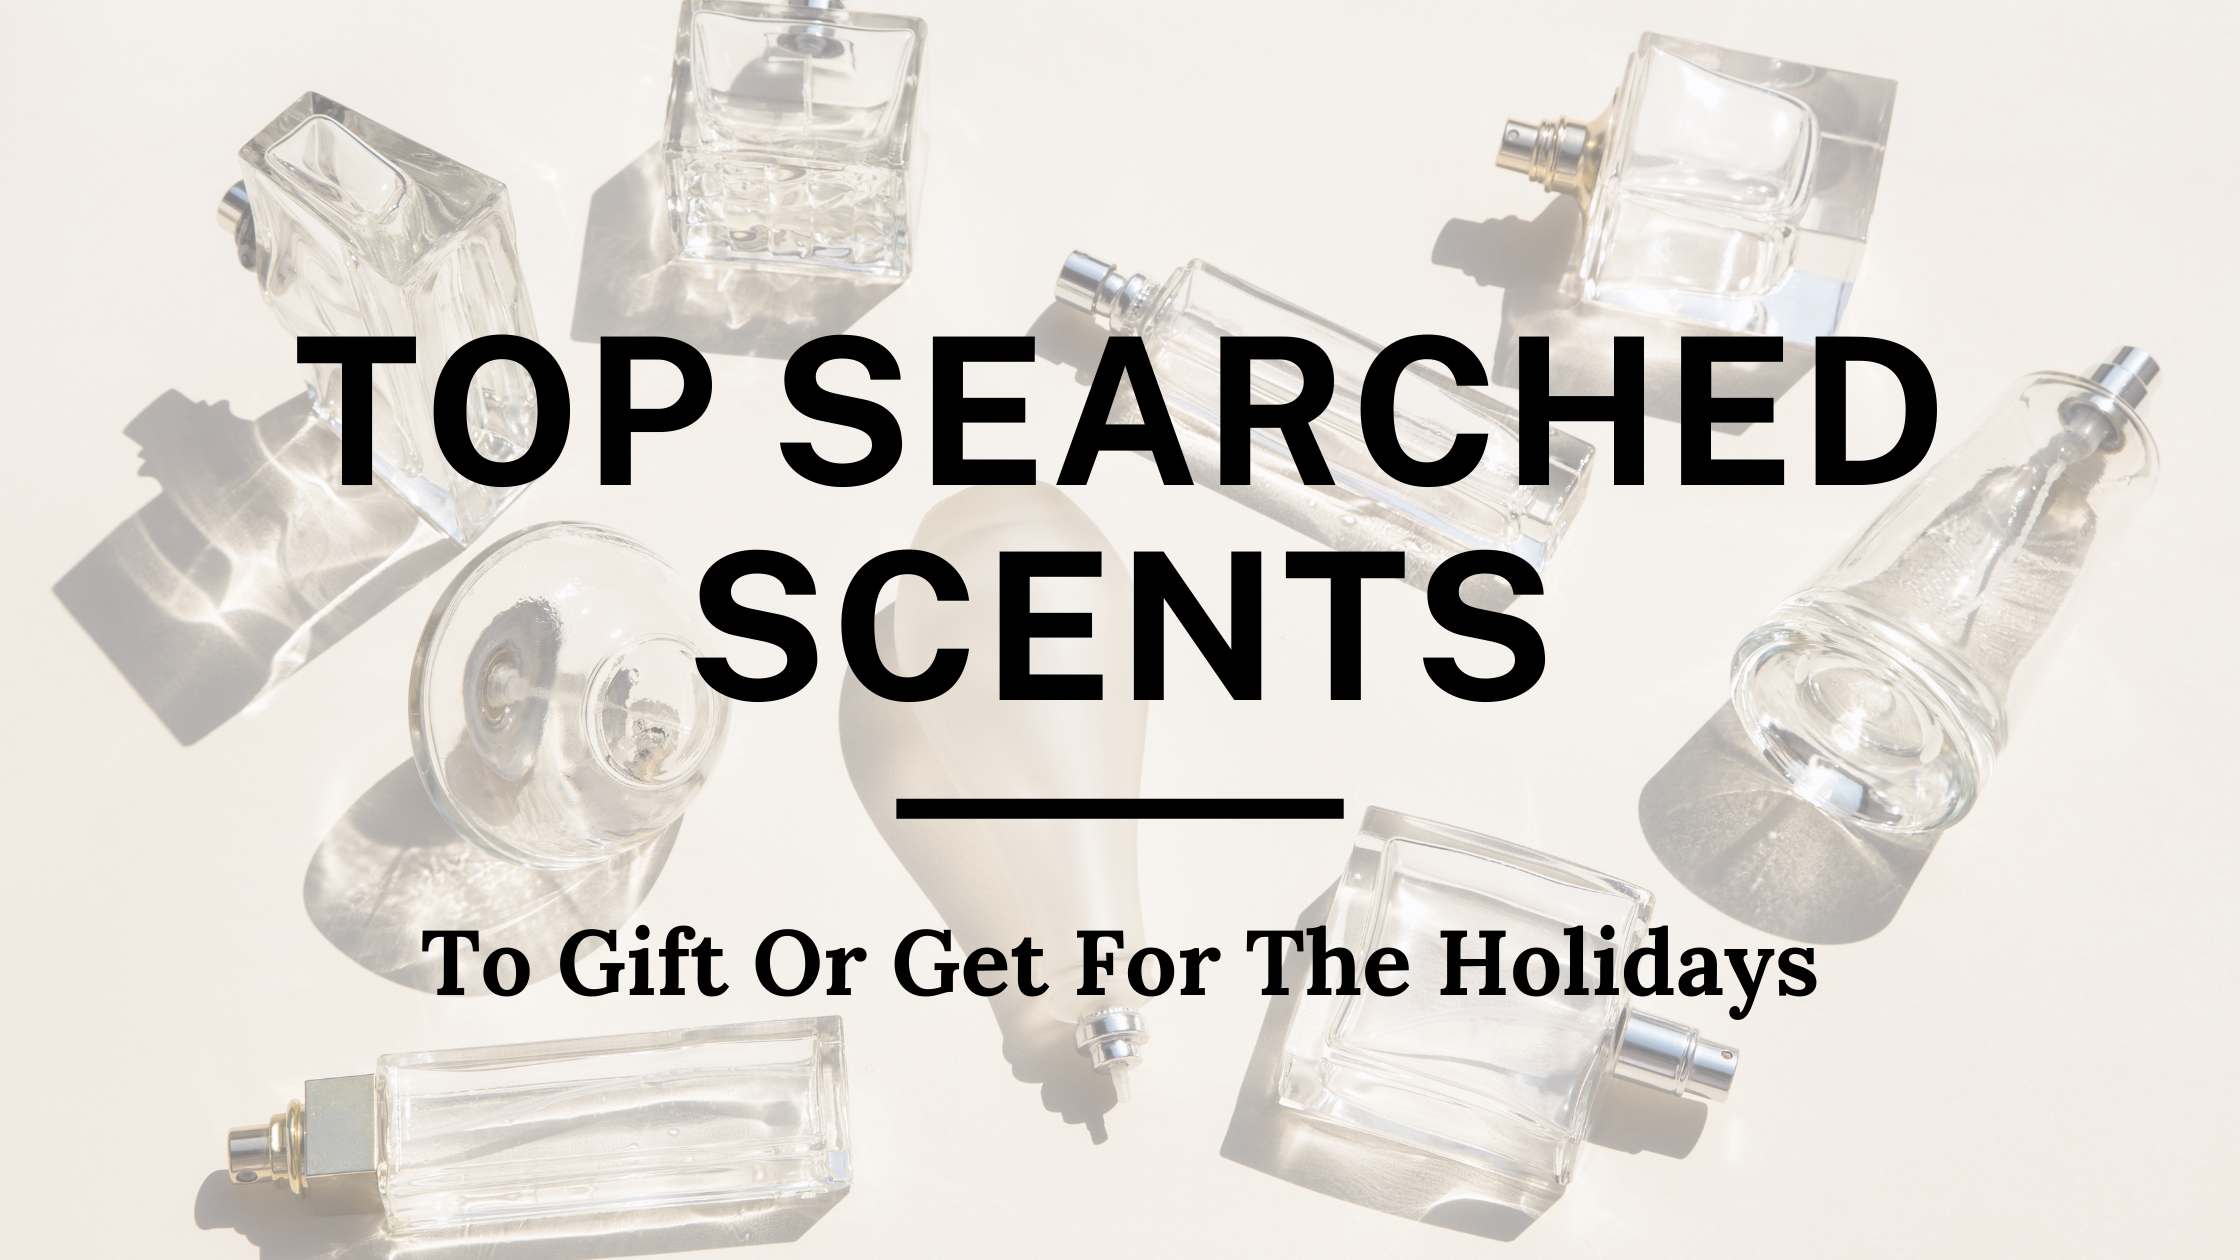 The Most Popular Searched Scents to Gift for Christmas (Vol. 5)